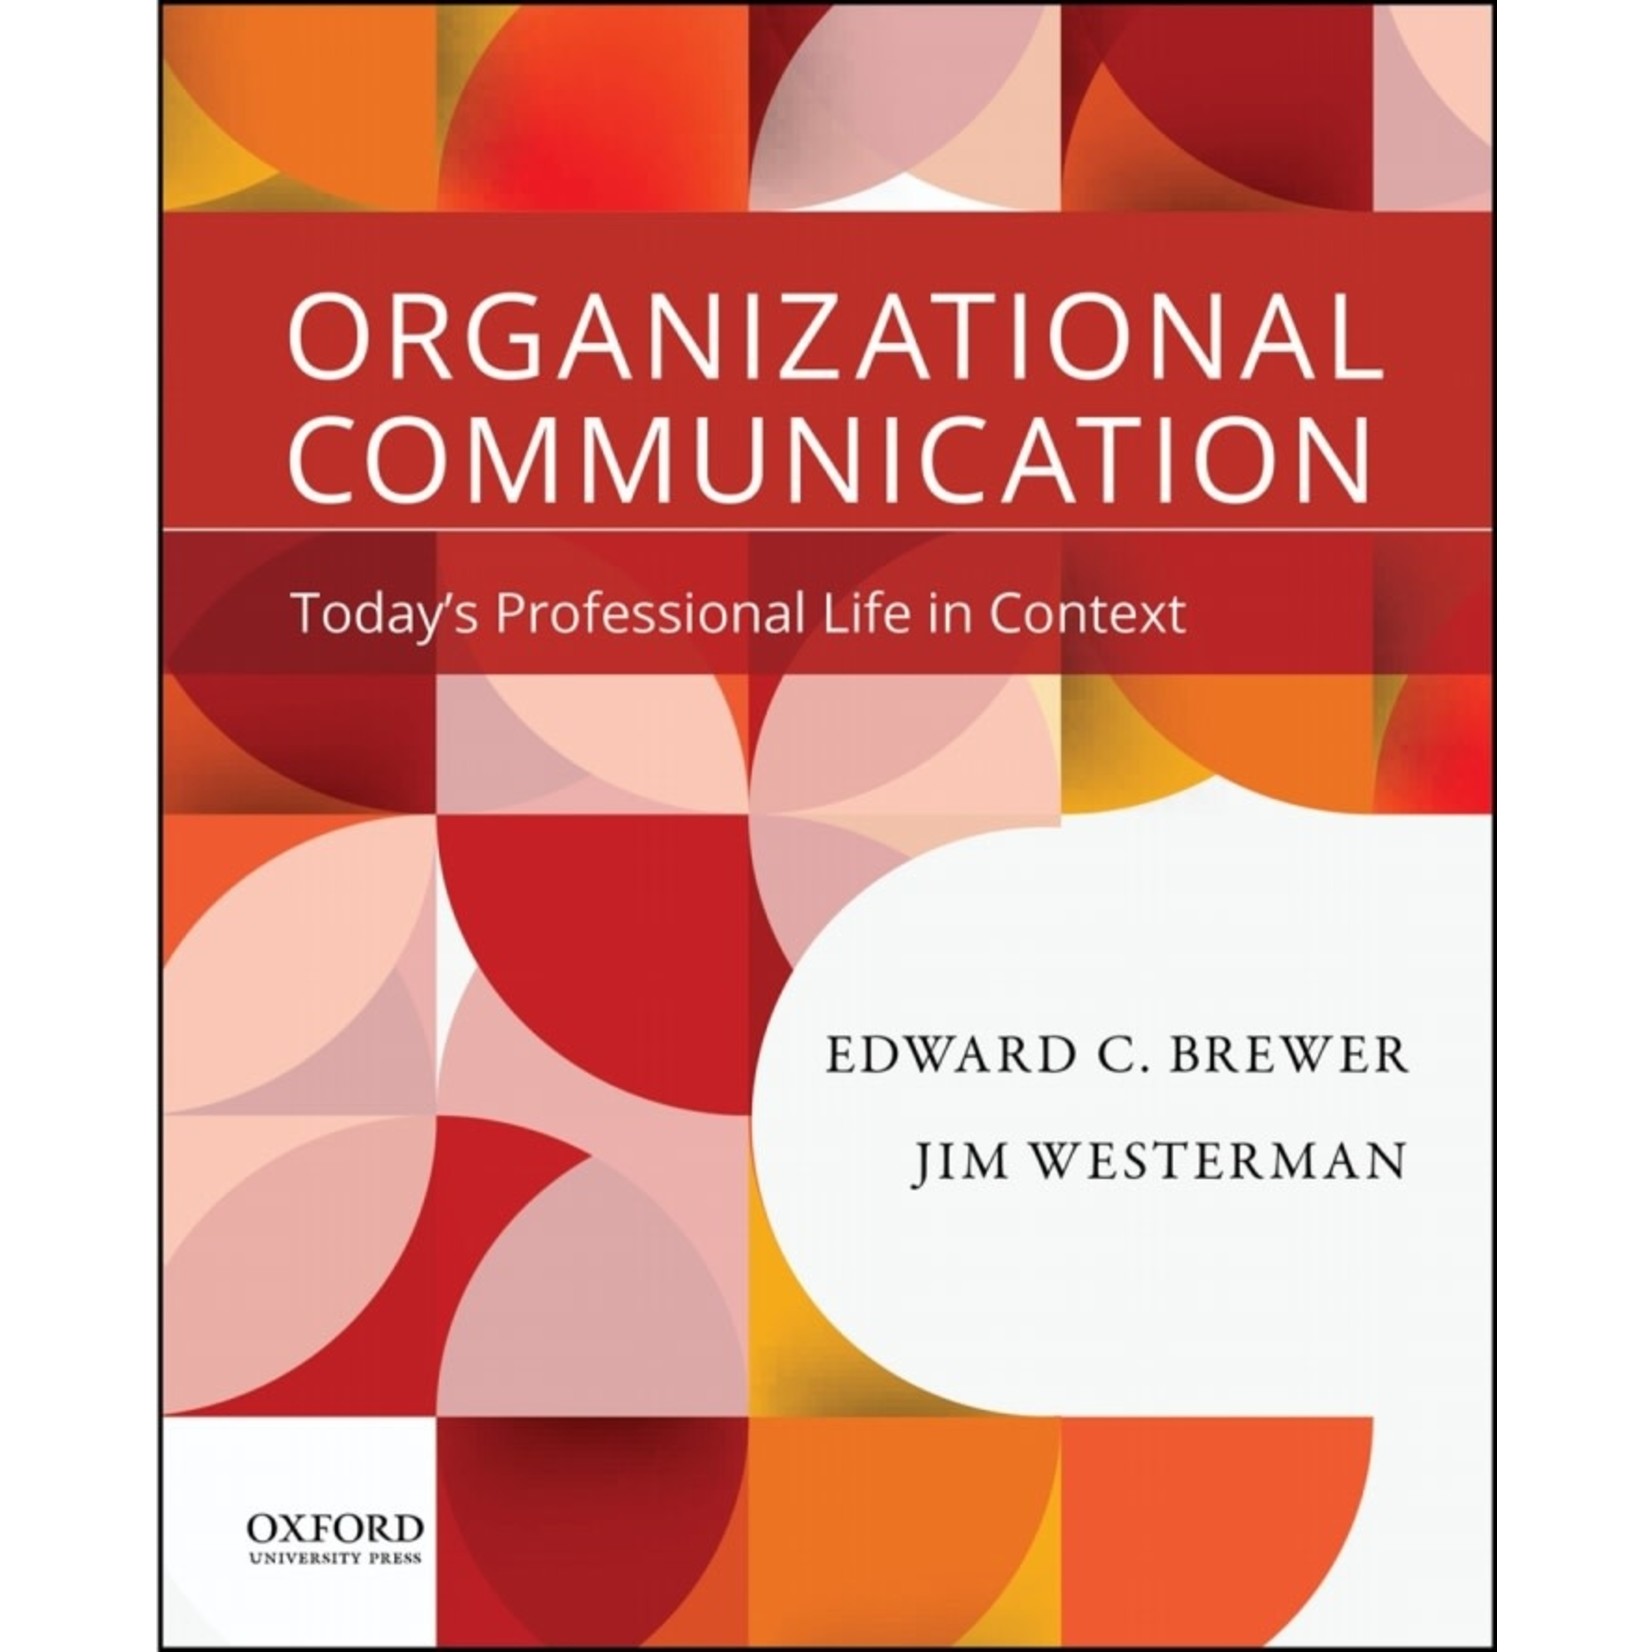 Organizational Communication: Today's Professional Life in Context, 1st Ed.